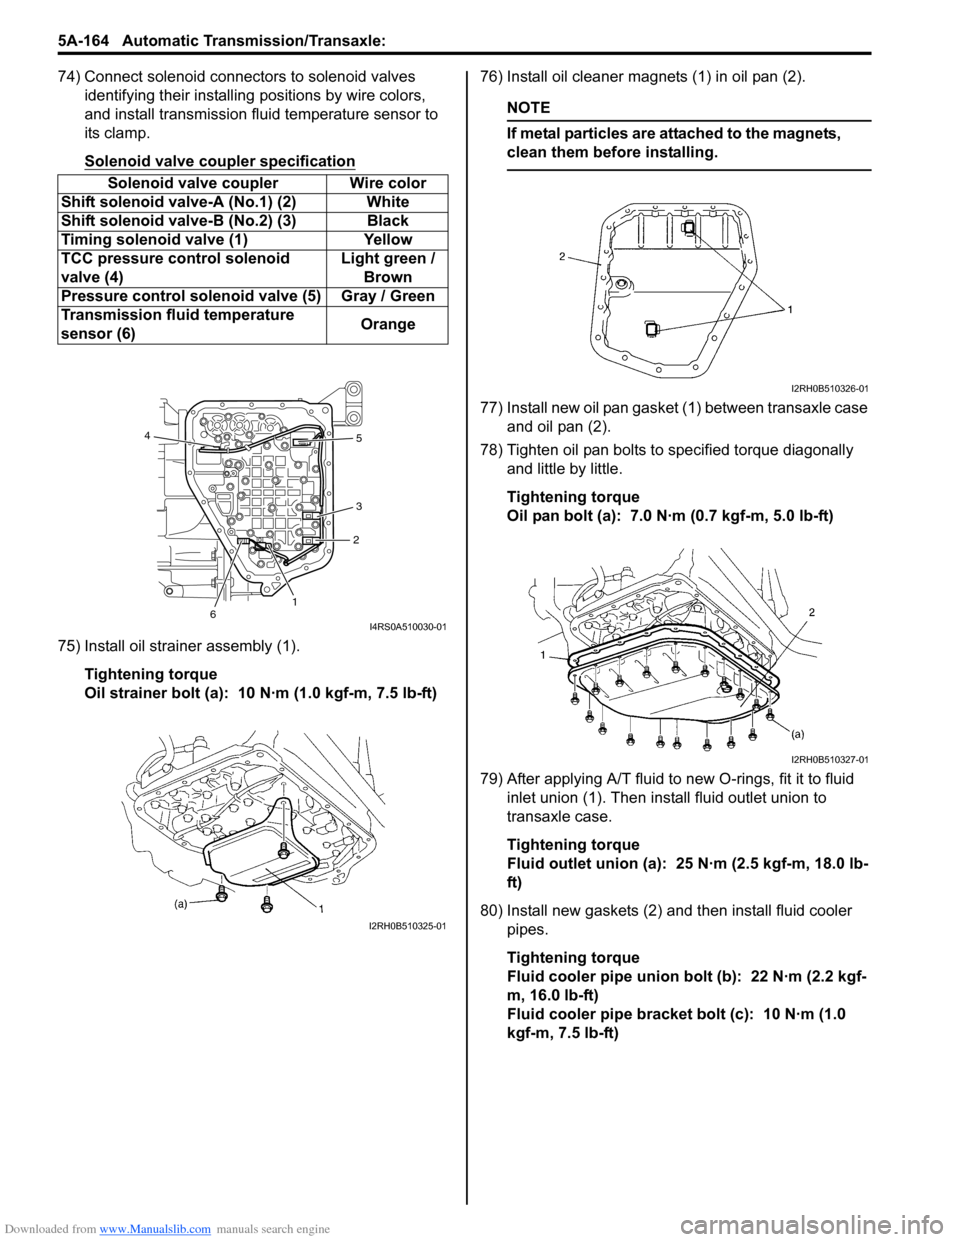 SUZUKI SWIFT 2008 2.G Service Workshop Manual Downloaded from www.Manualslib.com manuals search engine 5A-164 Automatic Transmission/Transaxle: 
74) Connect solenoid connectors to solenoid valves identifying their installing  positions by wire co